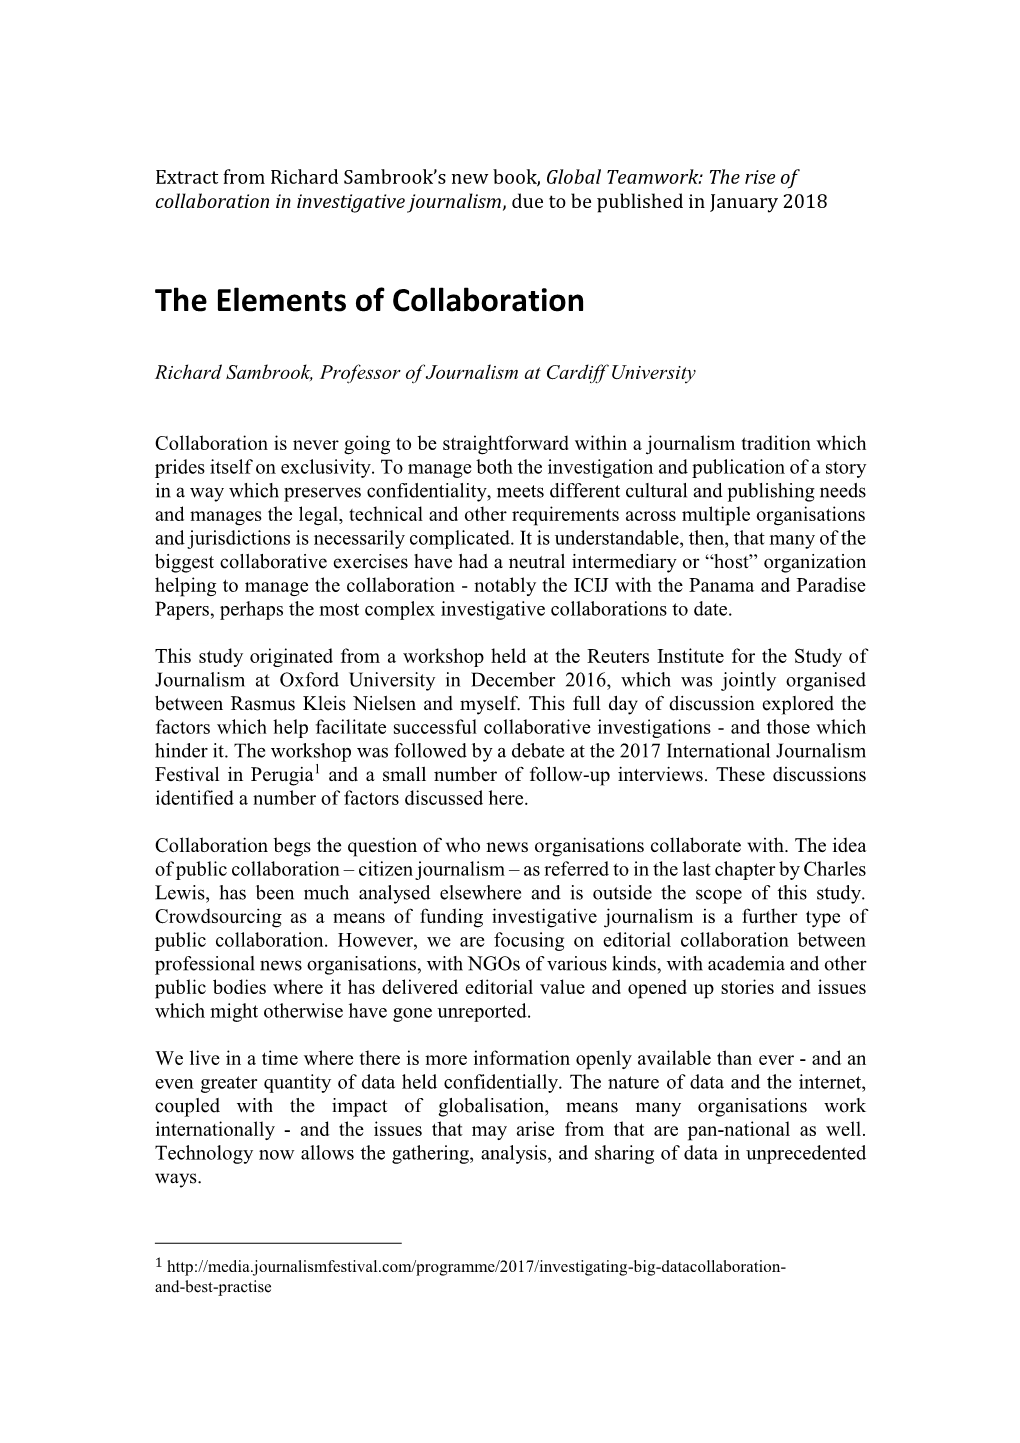 The Elements of Collaboration